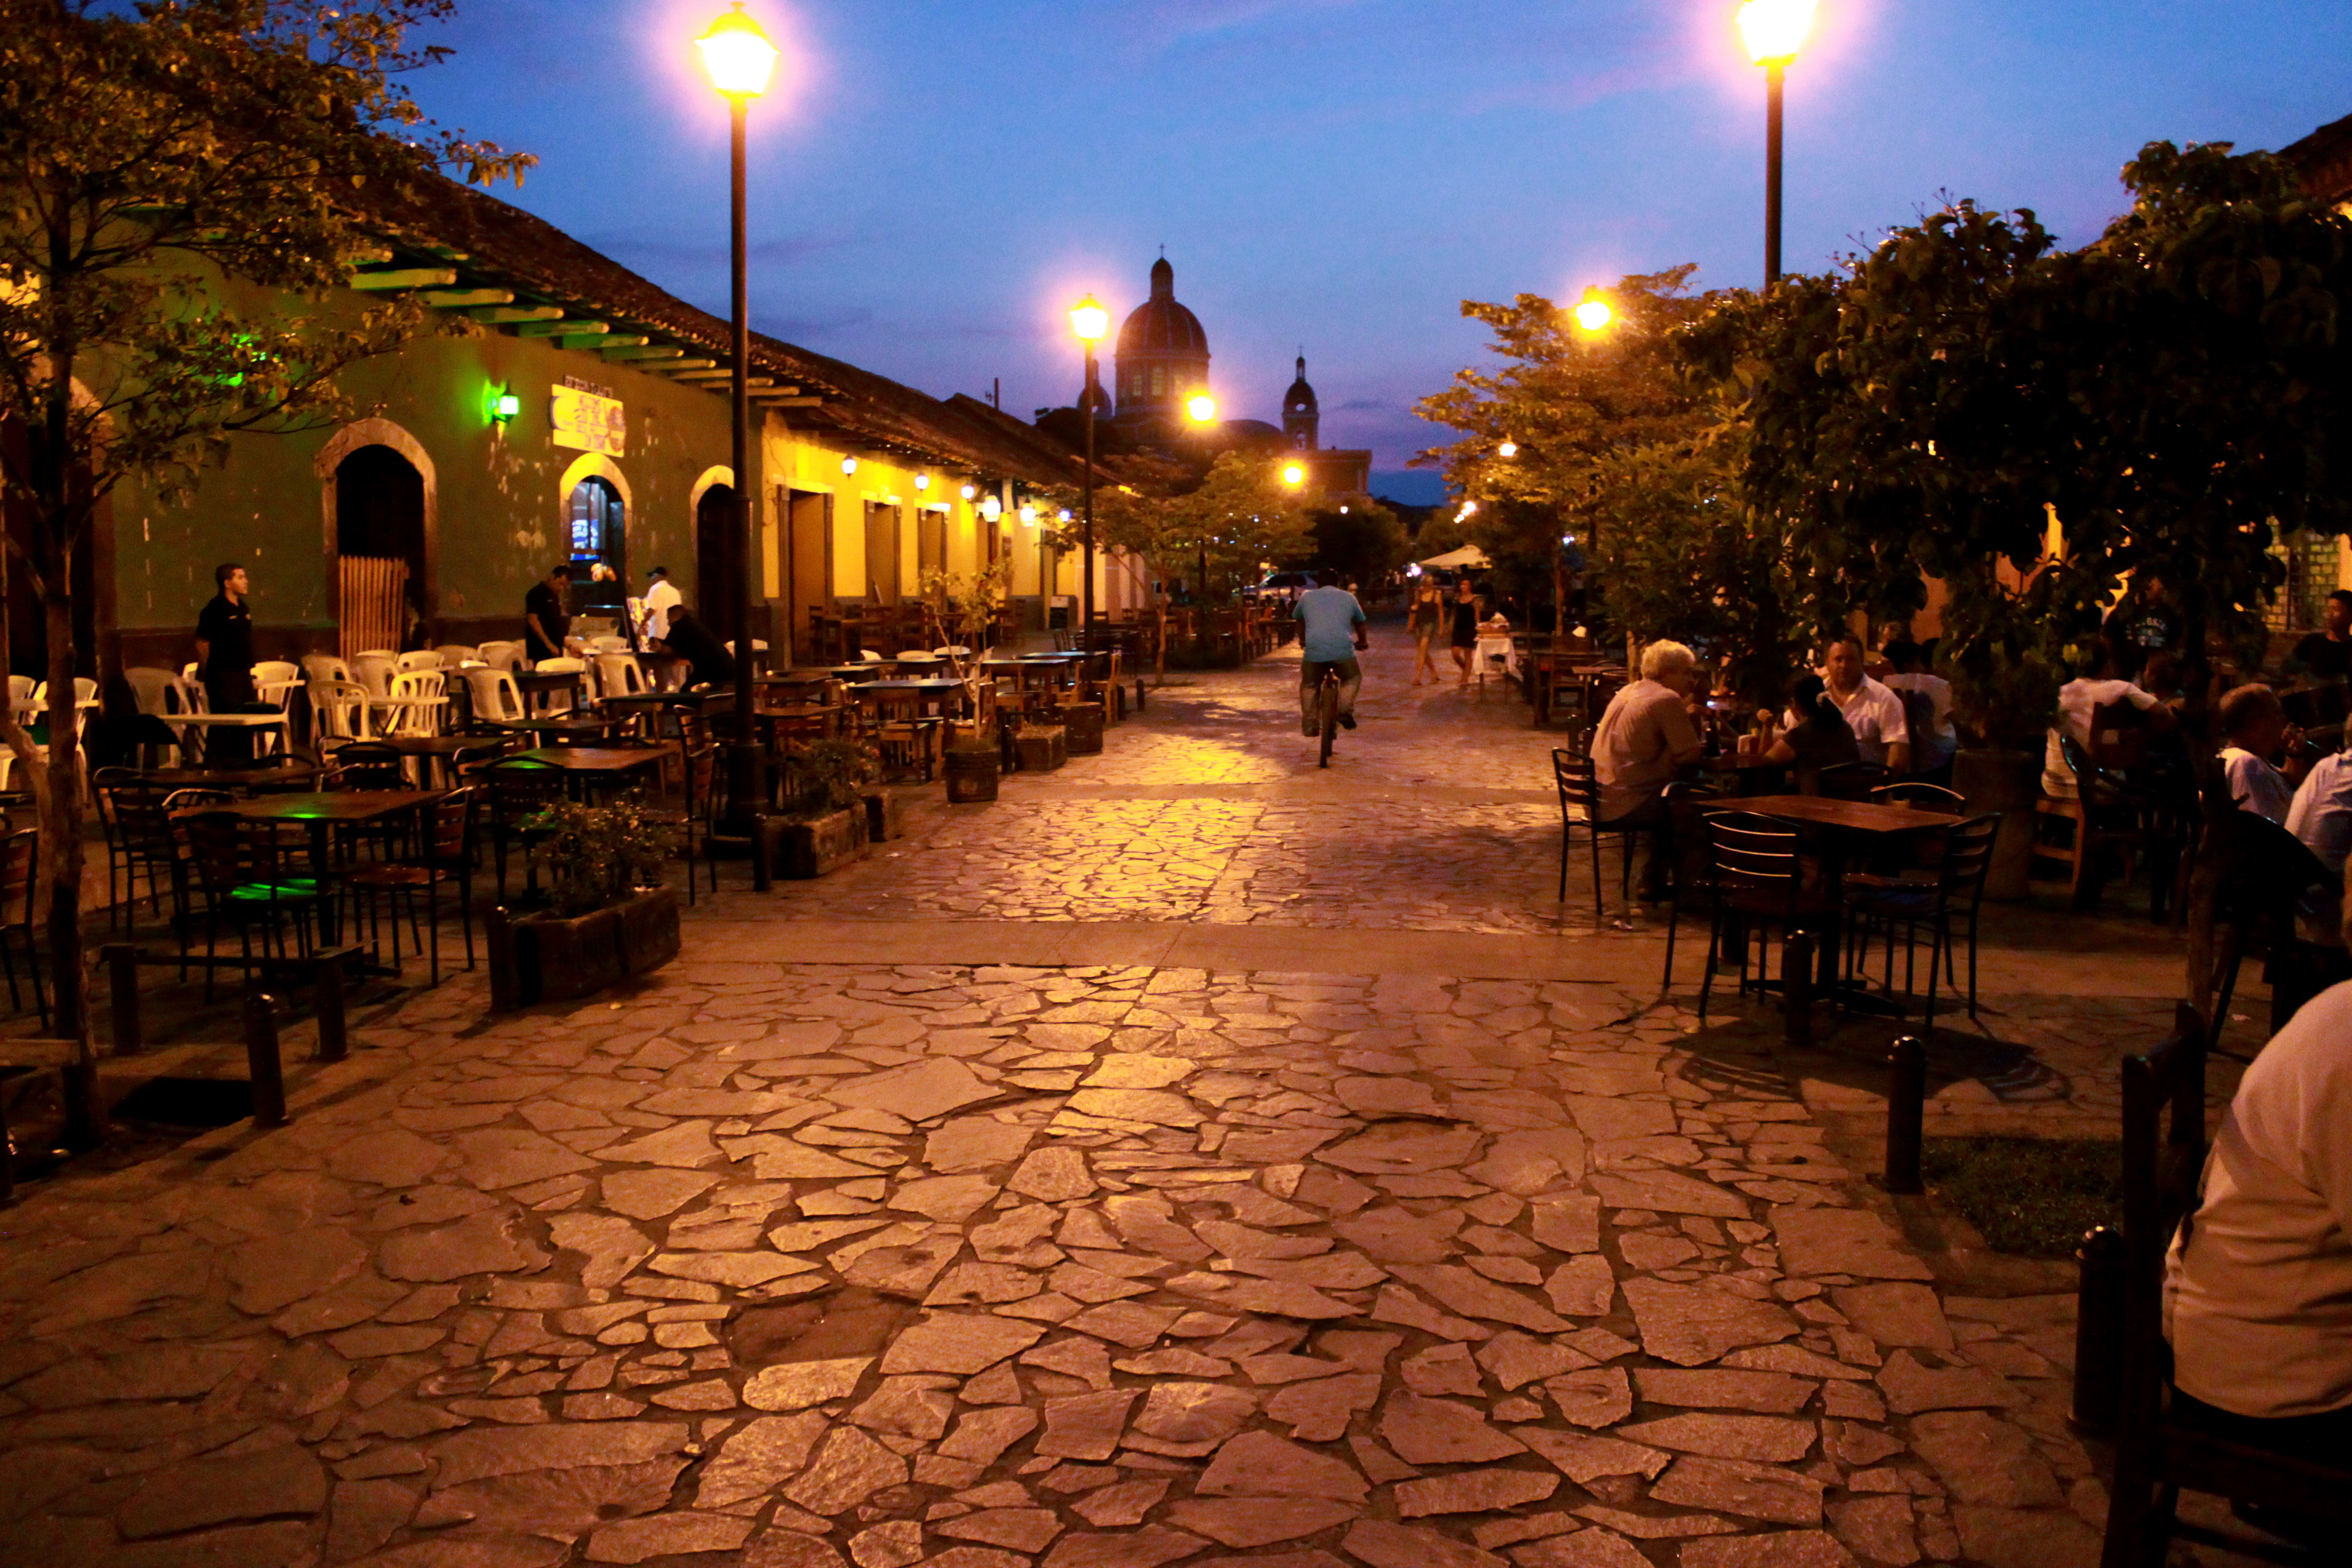 Calle Calzado (the main drag) early in the evening, before it was swarmed with tourists